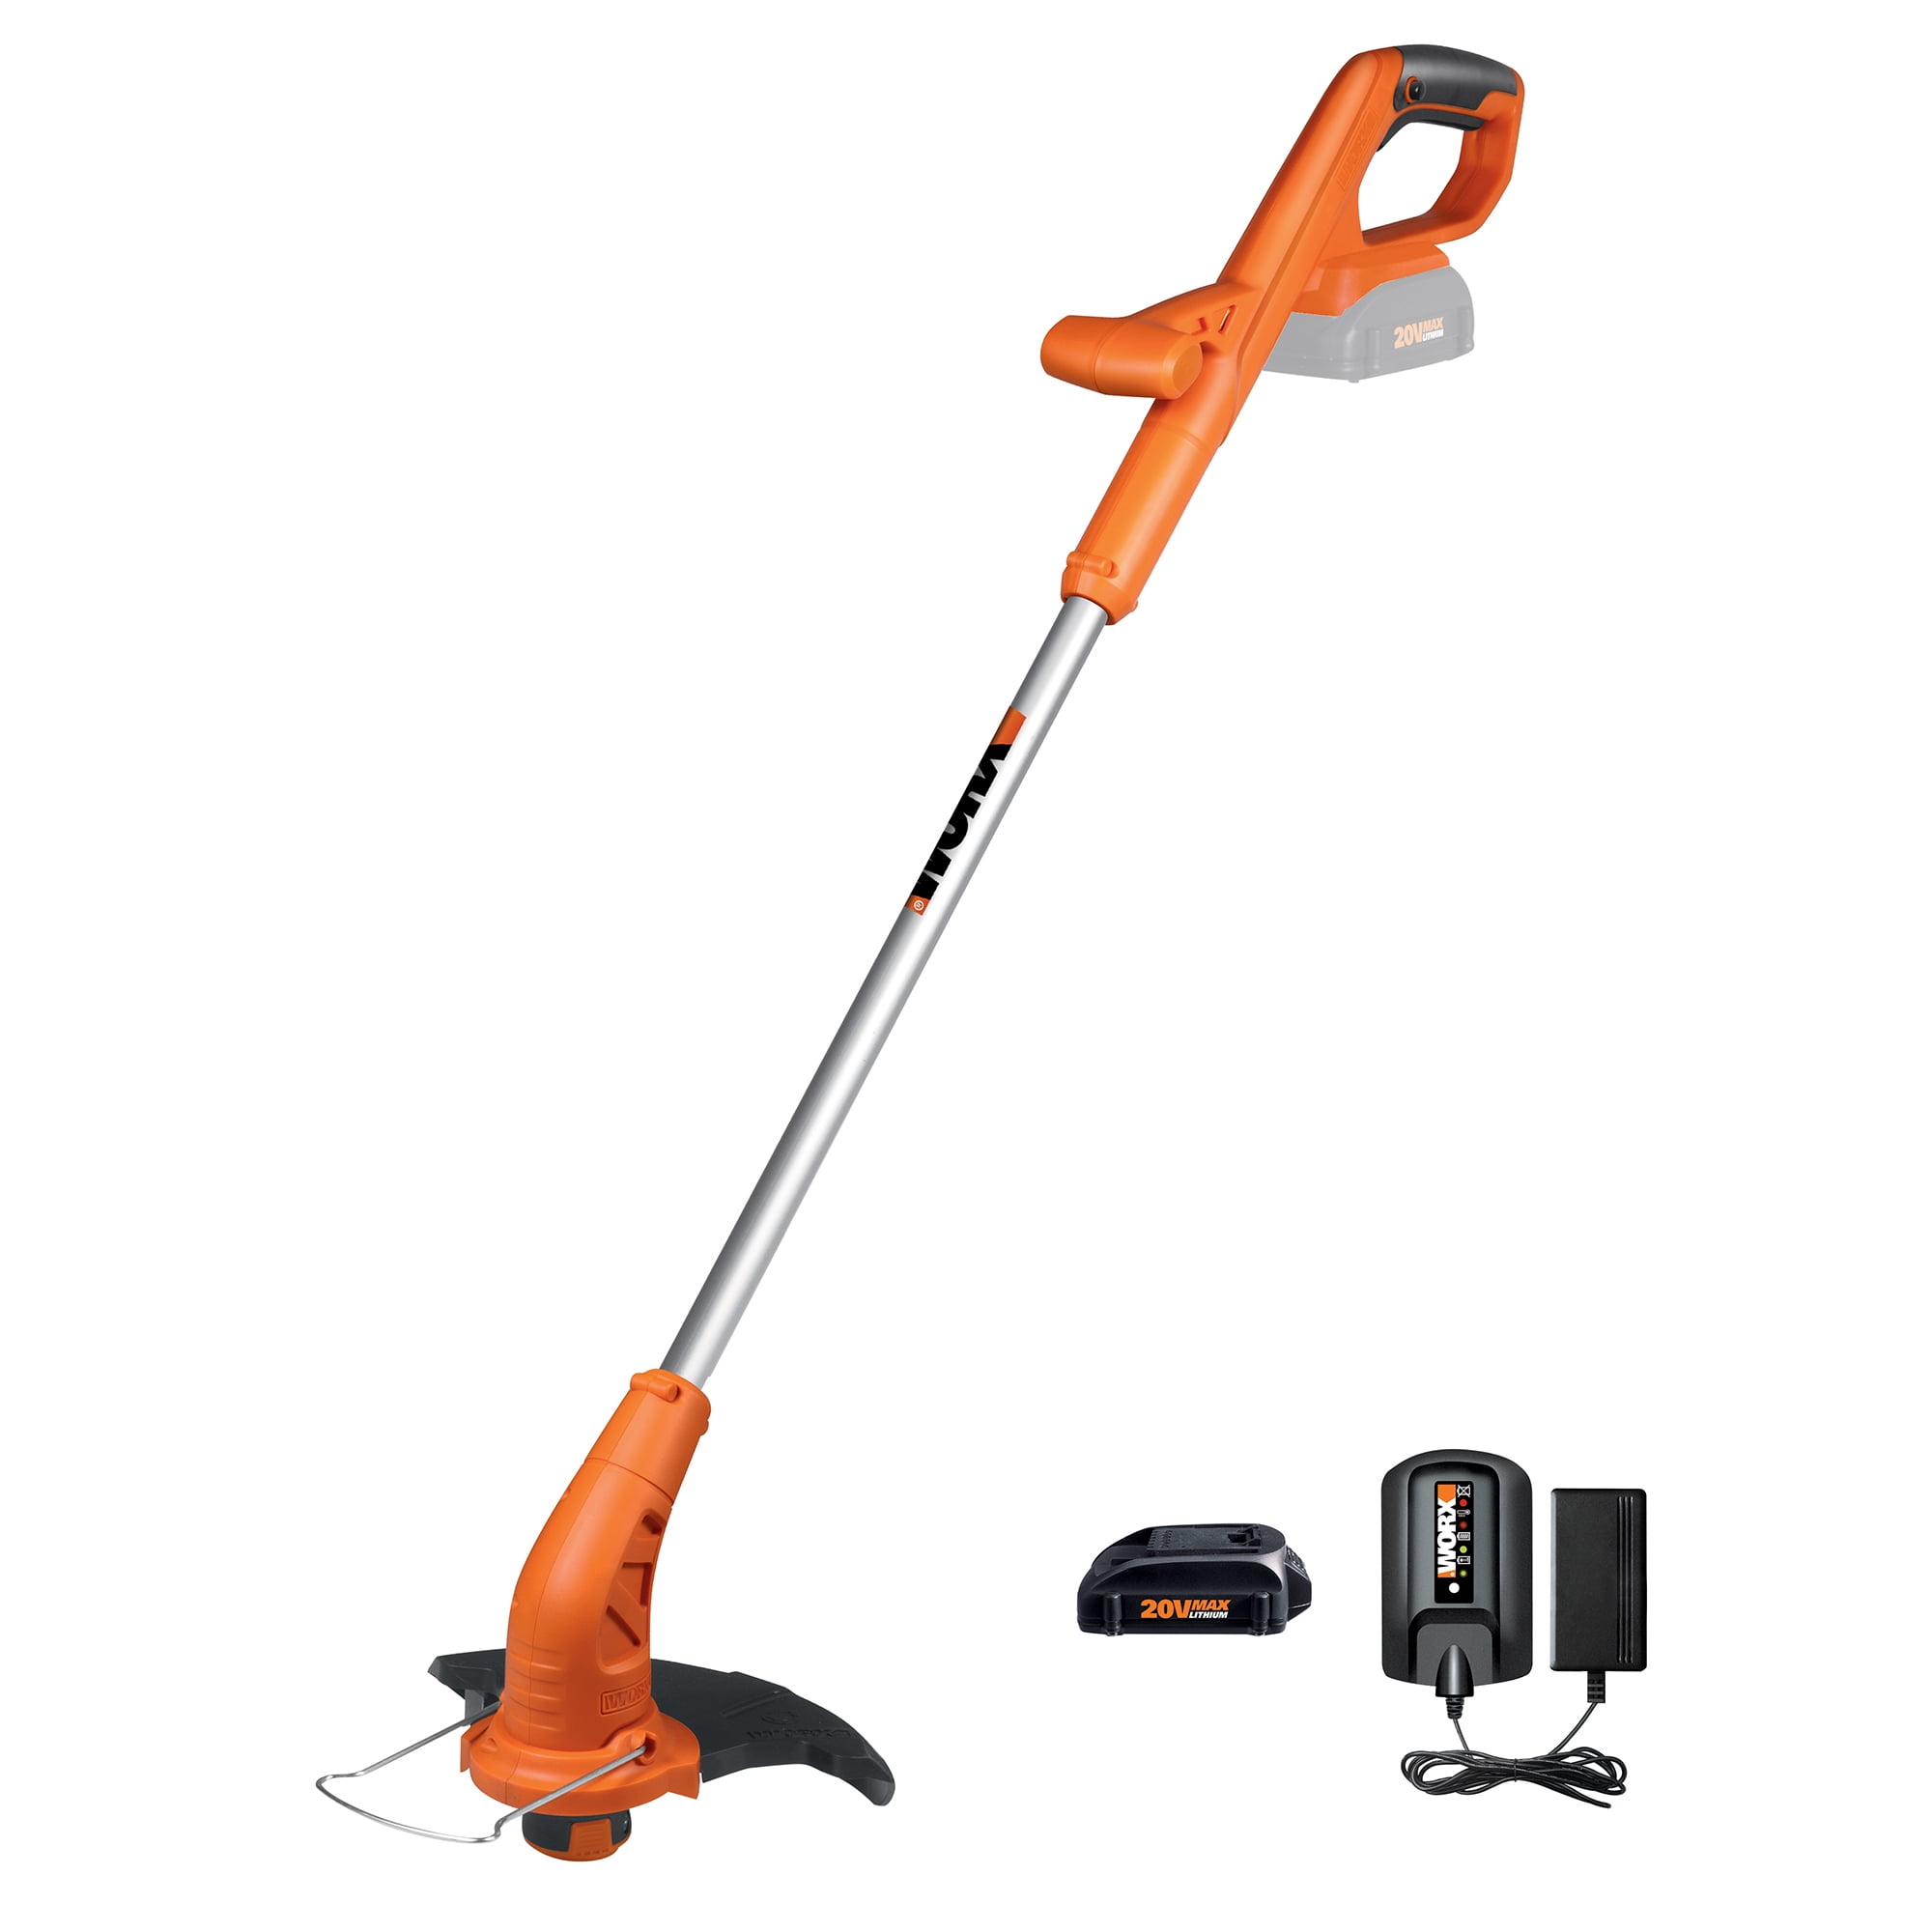 the worx weed trimmer